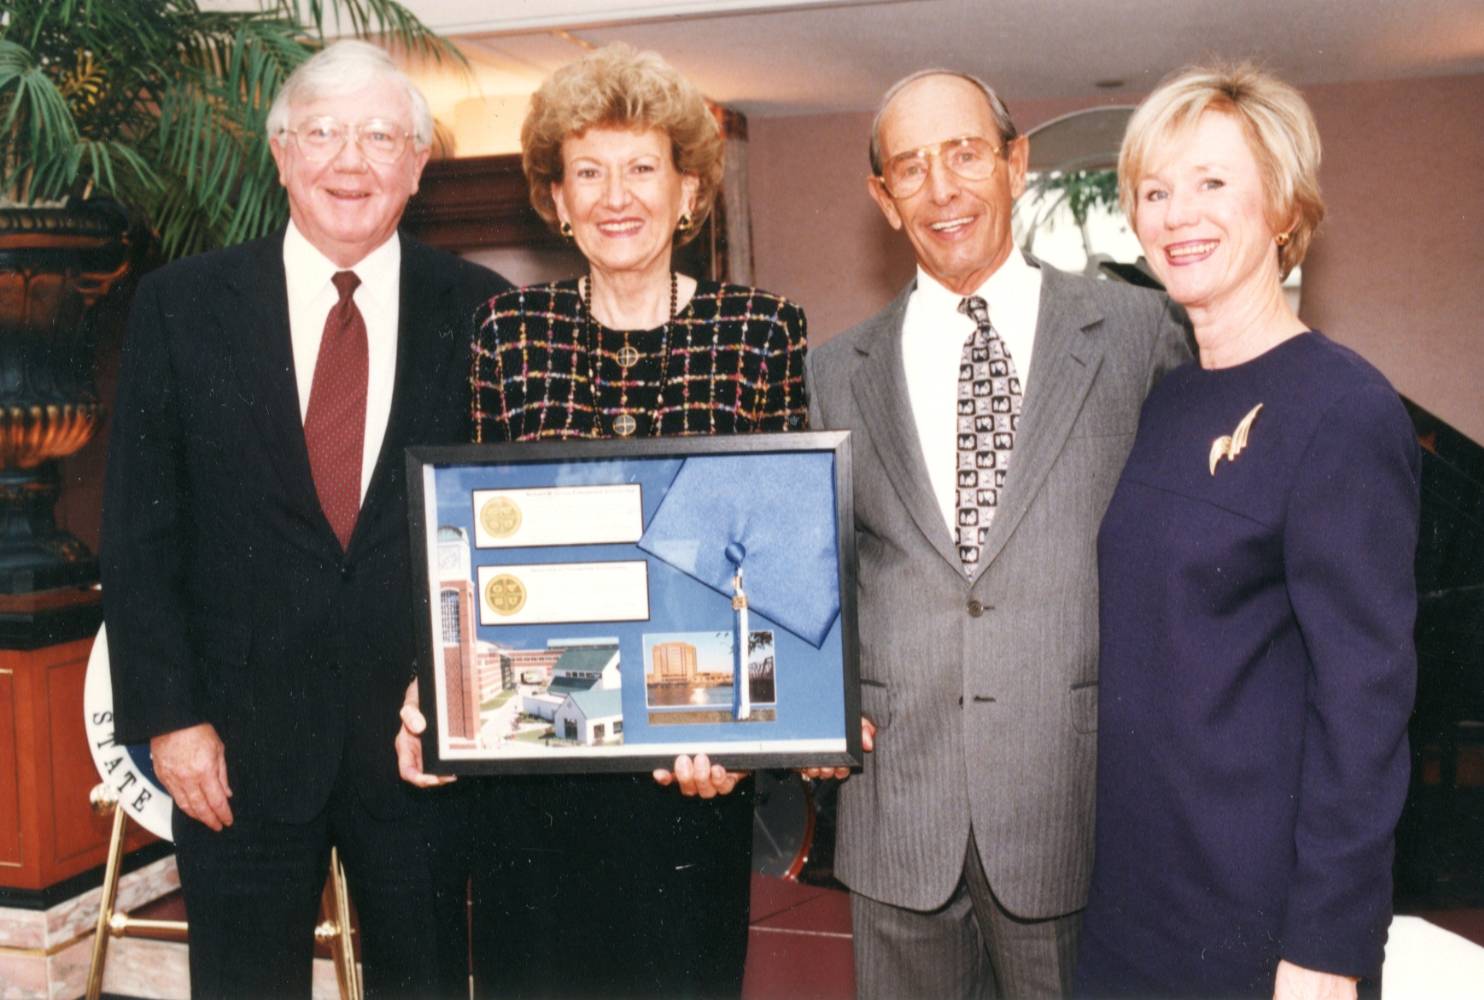 Richard and Helen DeVos with President Emeritus Don and Nancy Lubbers.